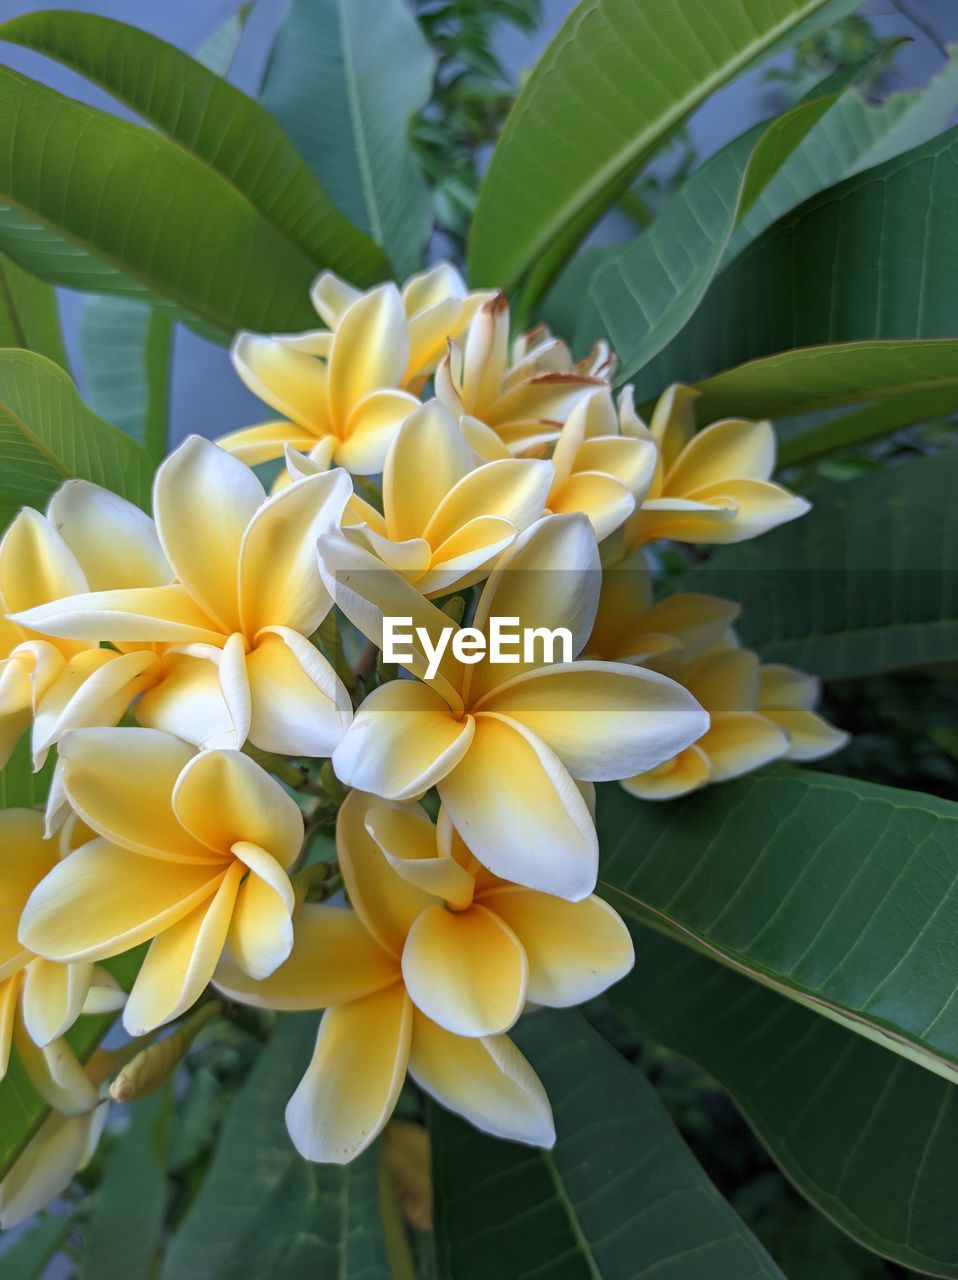 plant, flower, flowering plant, leaf, plant part, beauty in nature, freshness, growth, nature, close-up, yellow, petal, fragility, flower head, frangipani, no people, inflorescence, green, tropical climate, outdoors, day